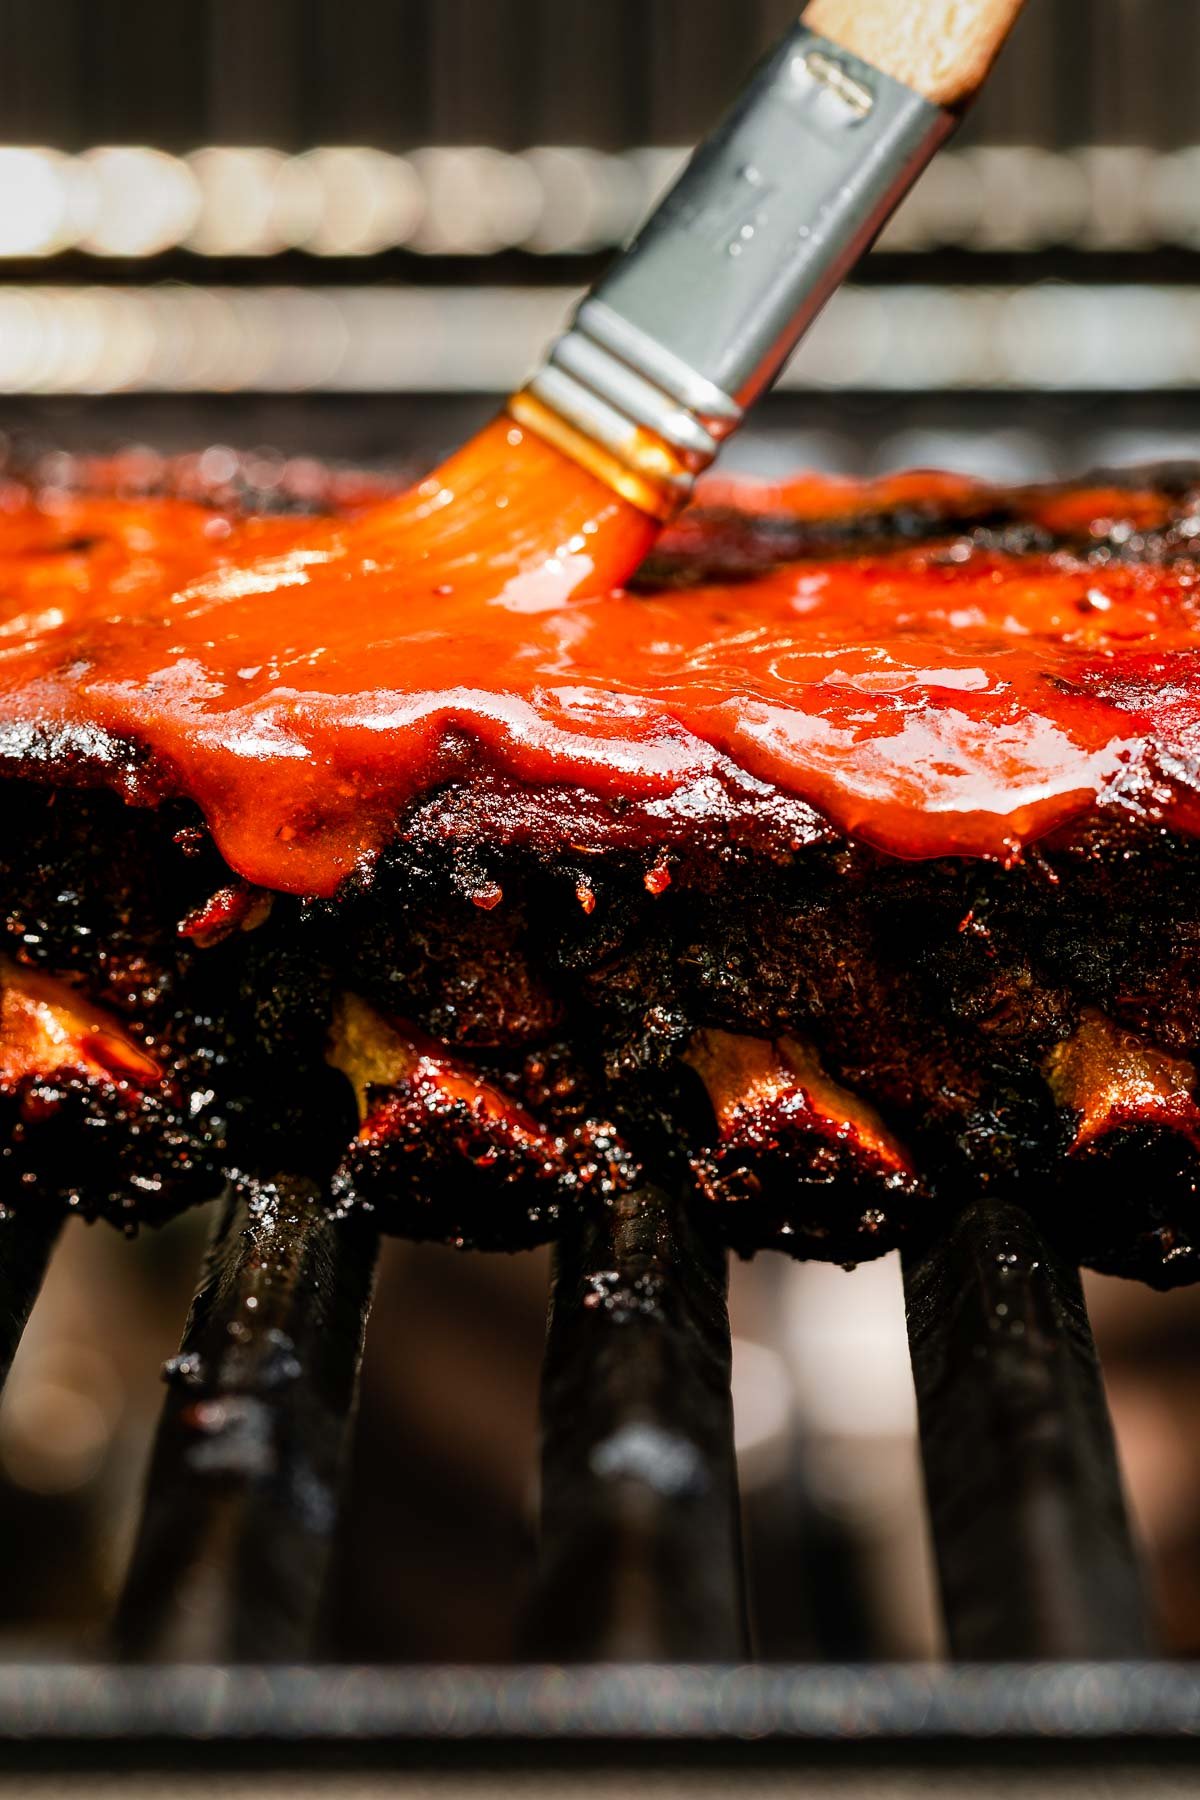 A macro close-up shot from the side of charred baby back ribs on the grill, being brushed with BBQ sauce.